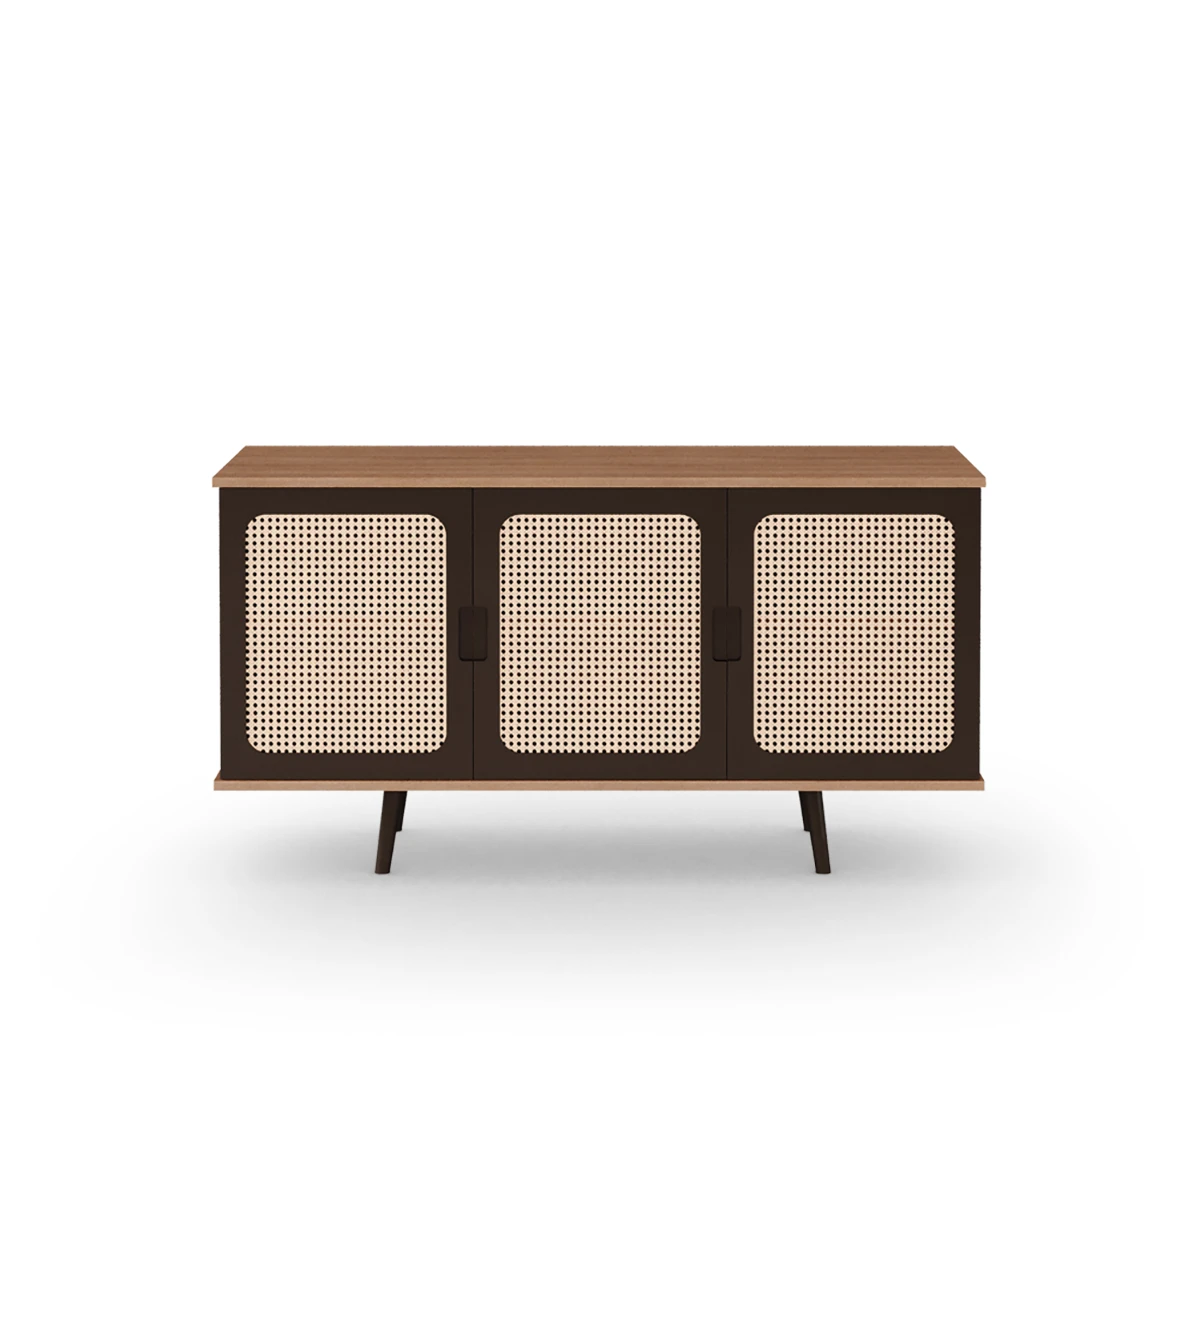 Sideboard with 3 rattan detail doors, dark brown lacquered legs and walnut frame.